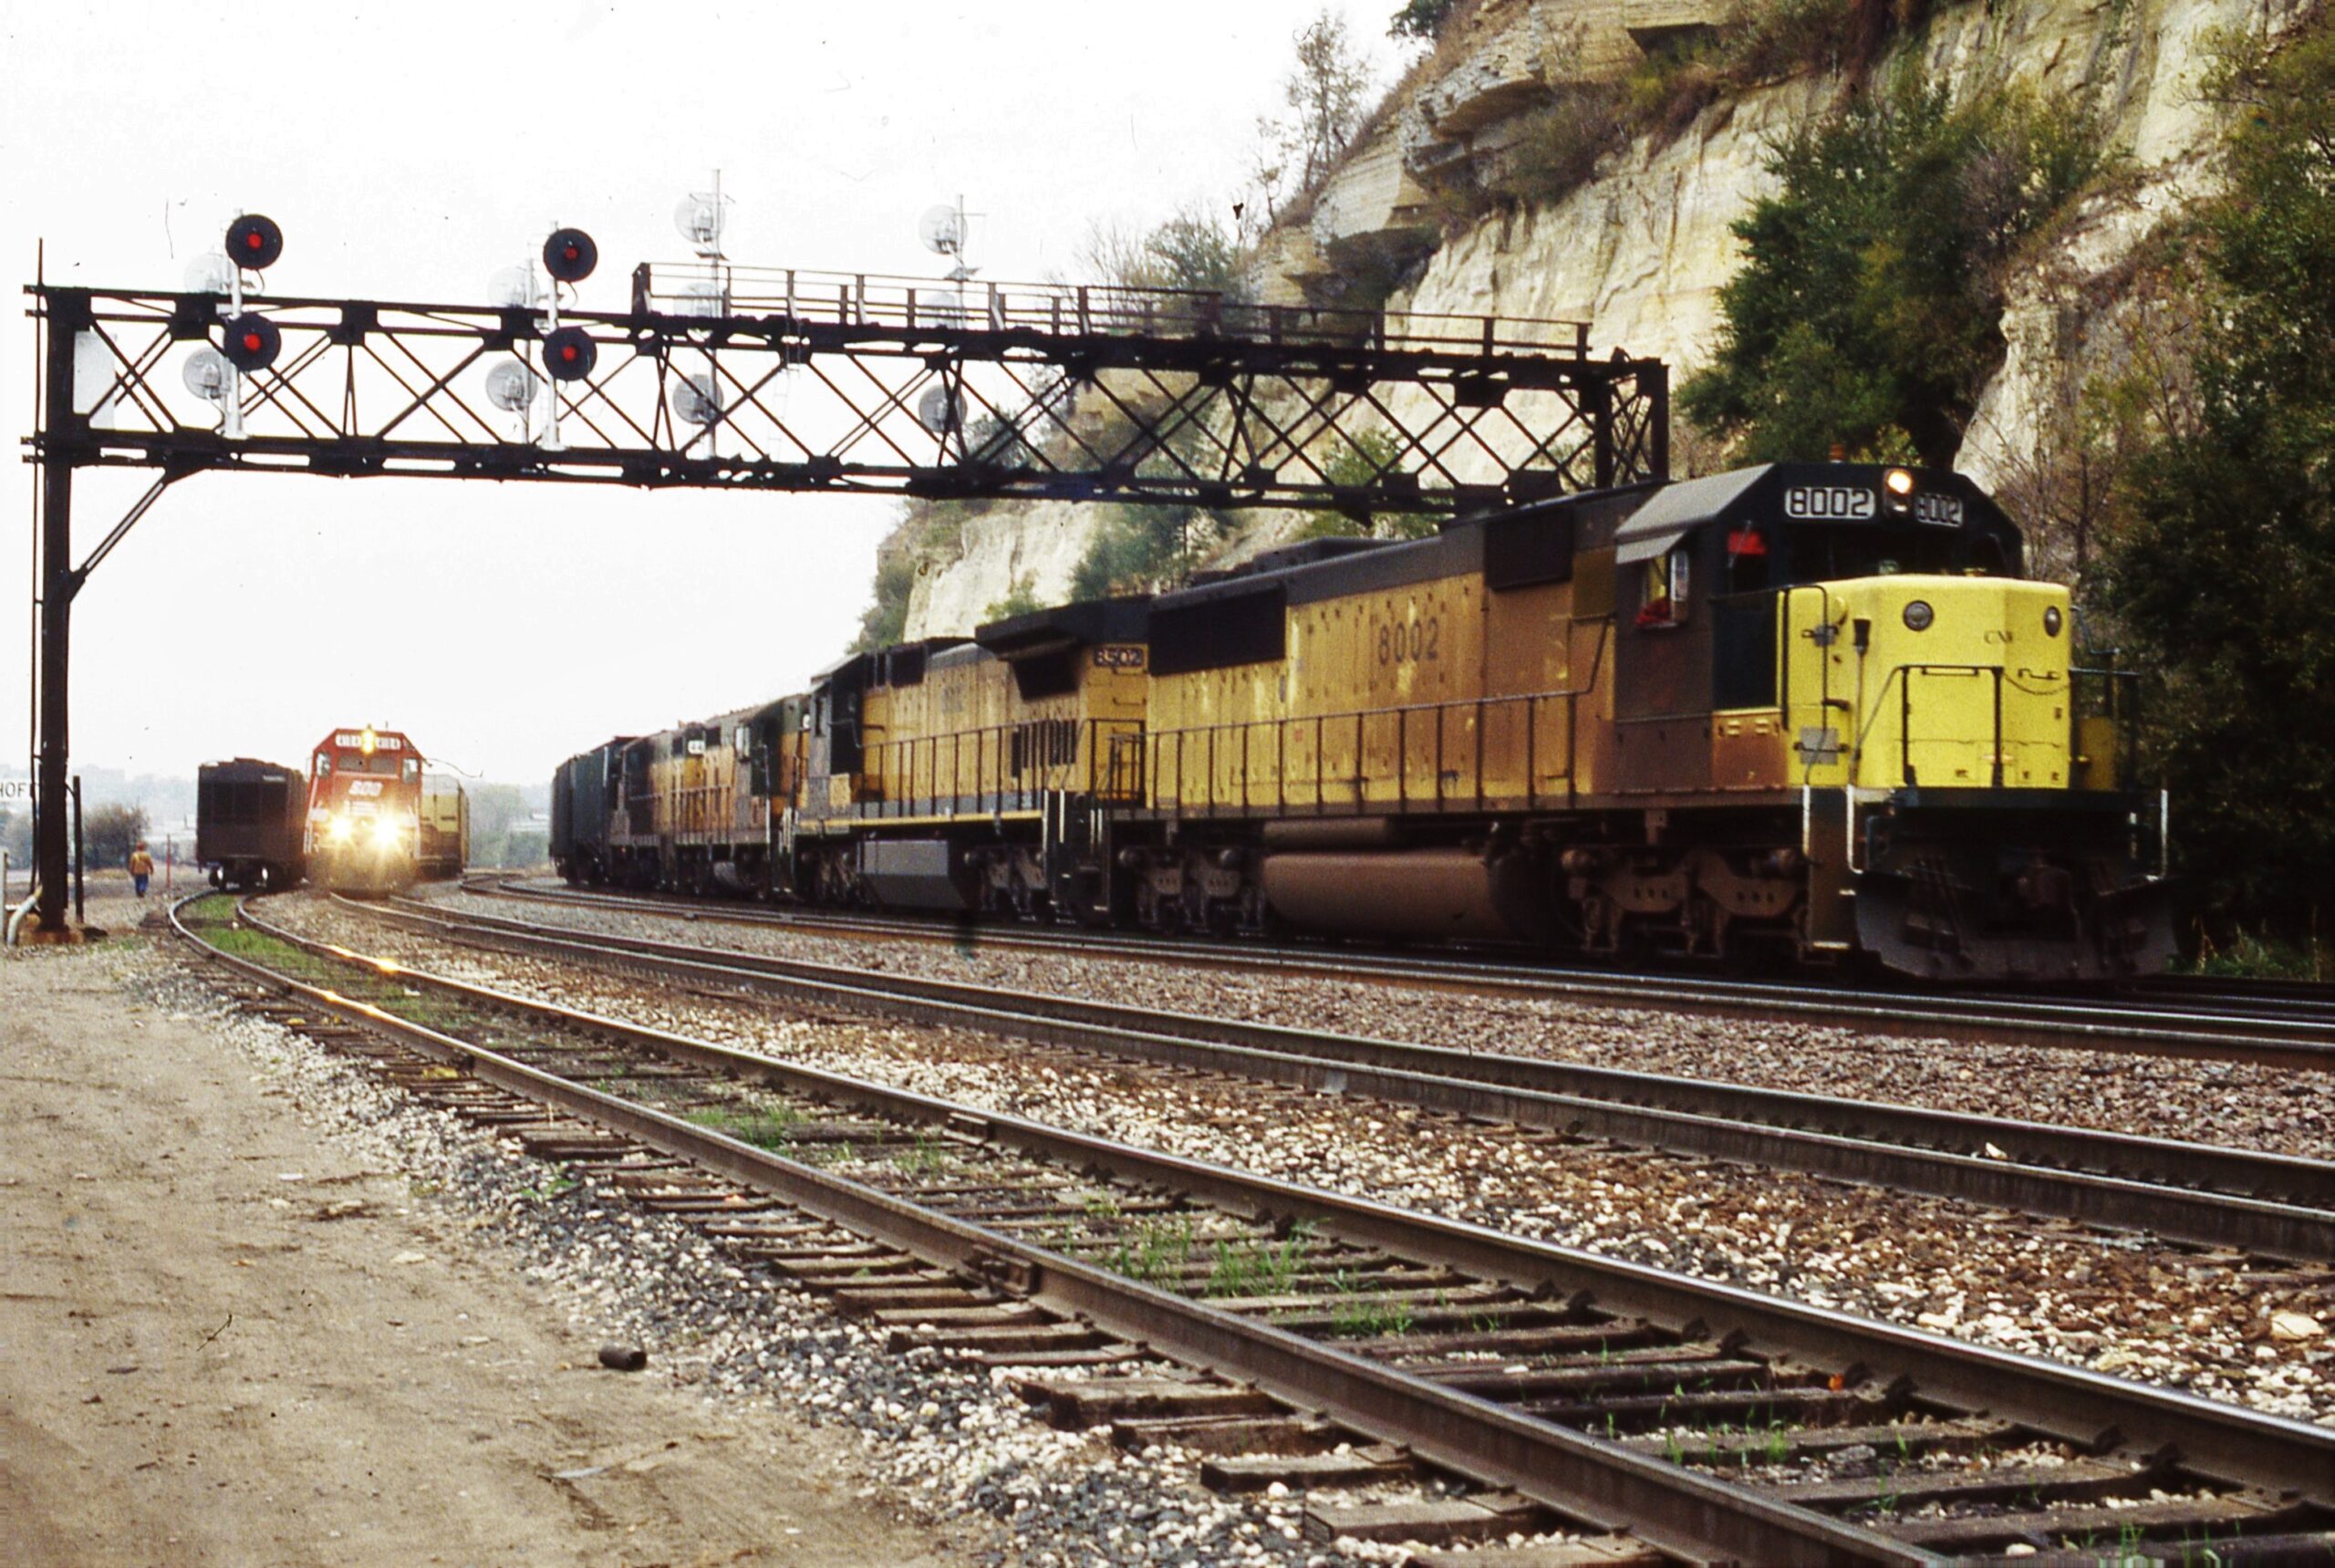 Chicago and Northwestern | Saint Paul, Mn. | SD60 8002 + 3 | eastbound freight | Hoffmans | October 20, 1992 | Dick Flock photograph